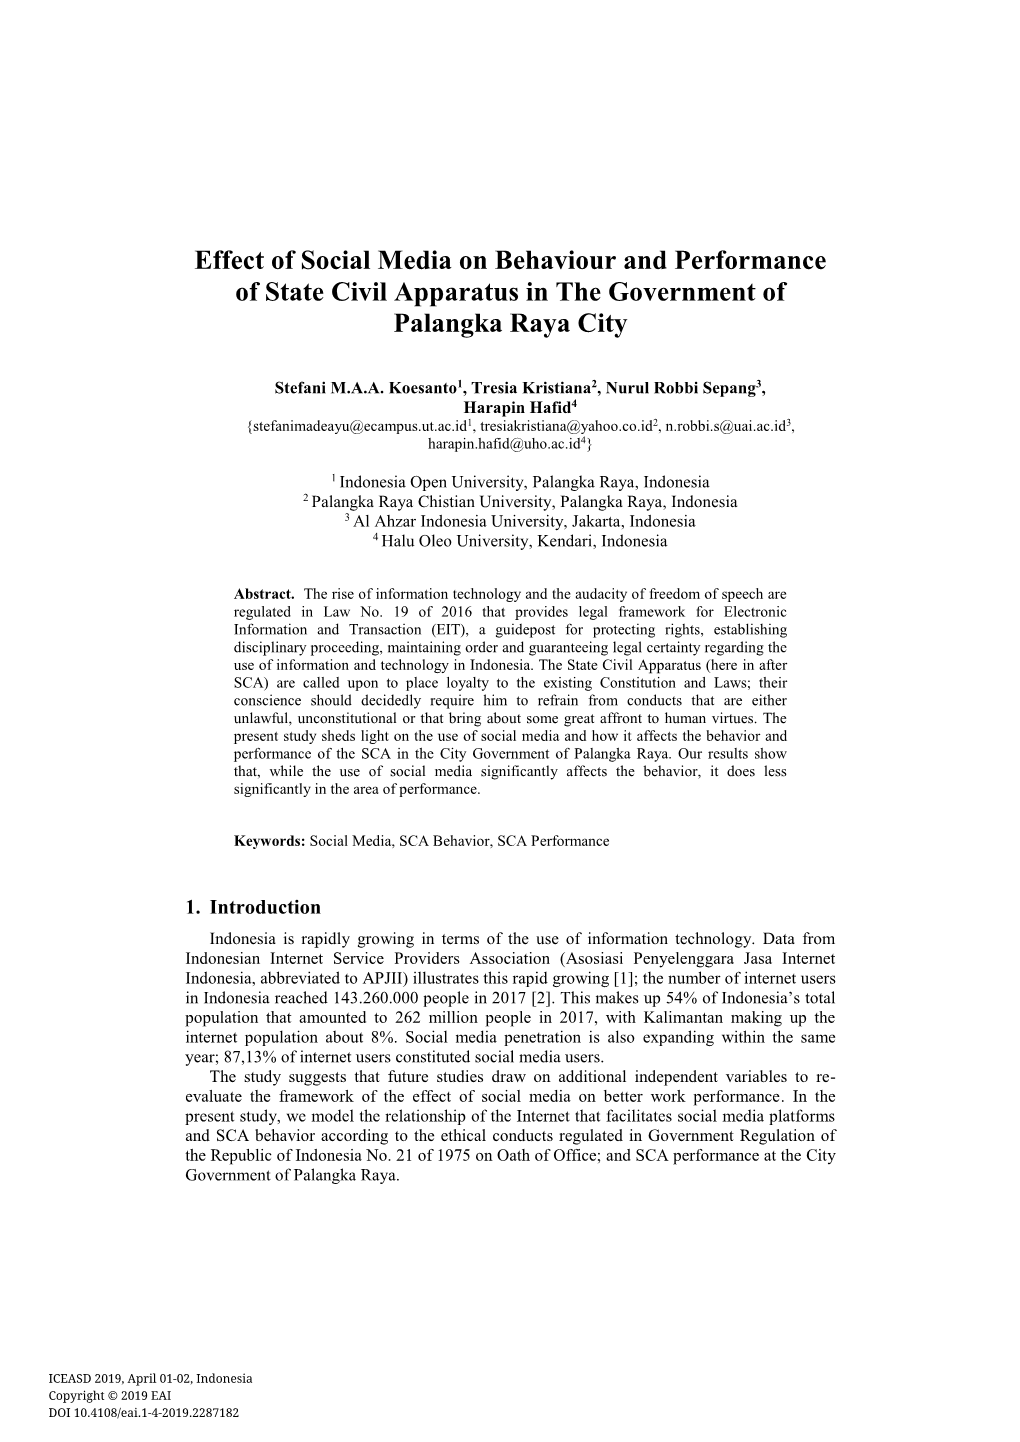 Effect of Social Media on Behaviour and Performance of State Civil Apparatus in the Government of Palangka Raya City